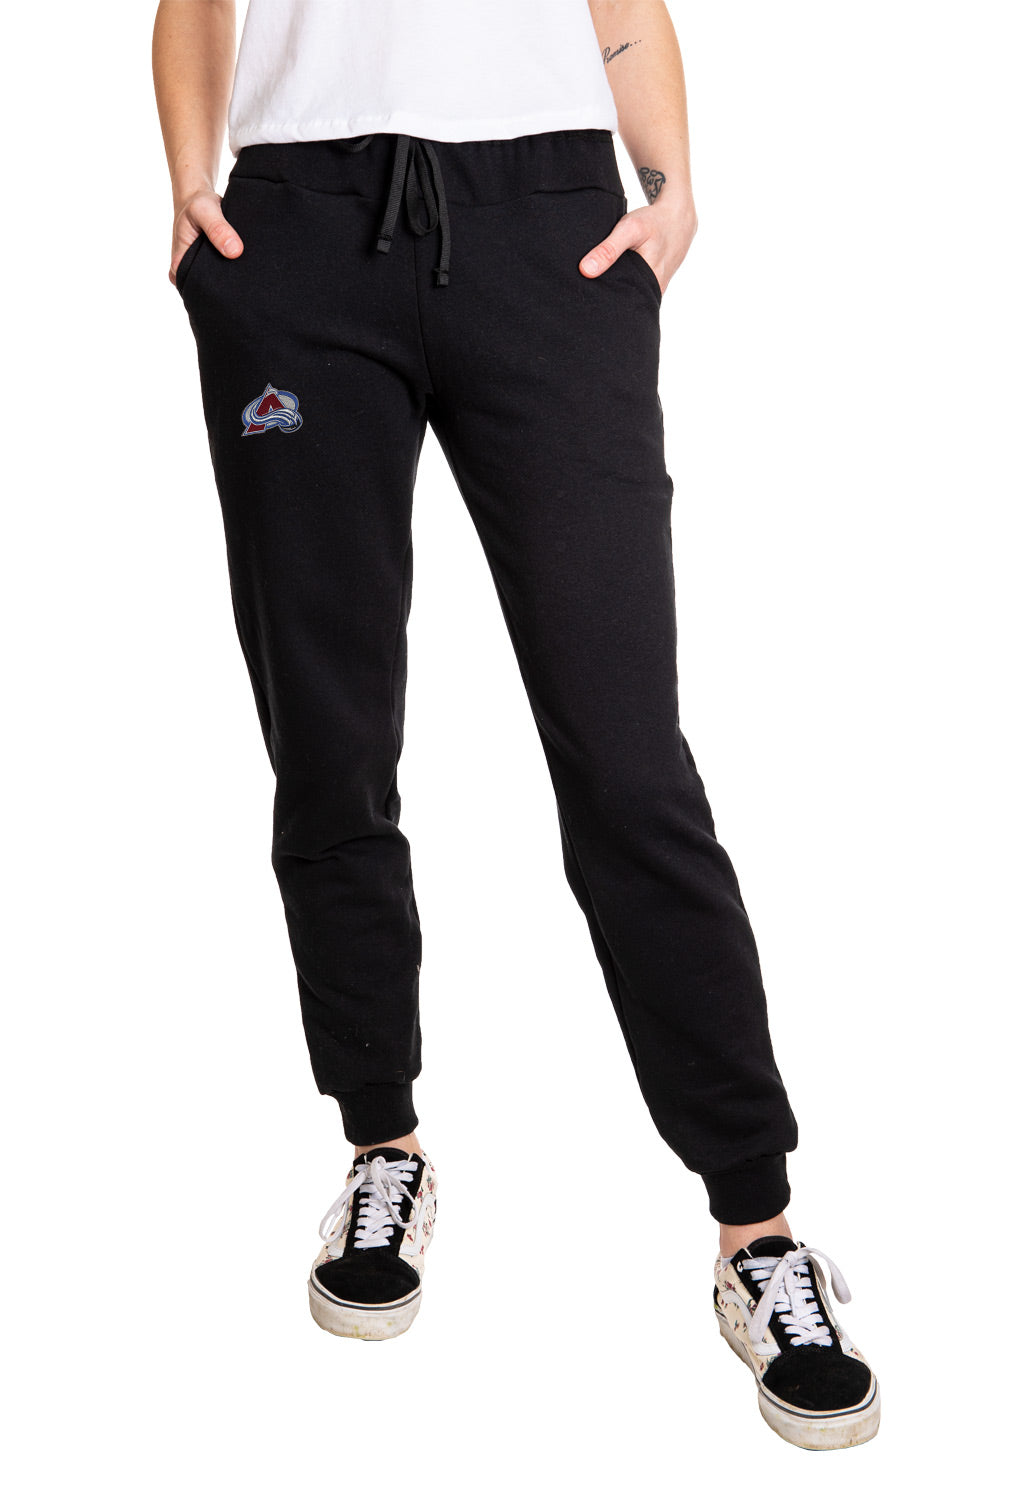 Colorado Avalanche Ladies Cuffed Jogger Style Track Pants